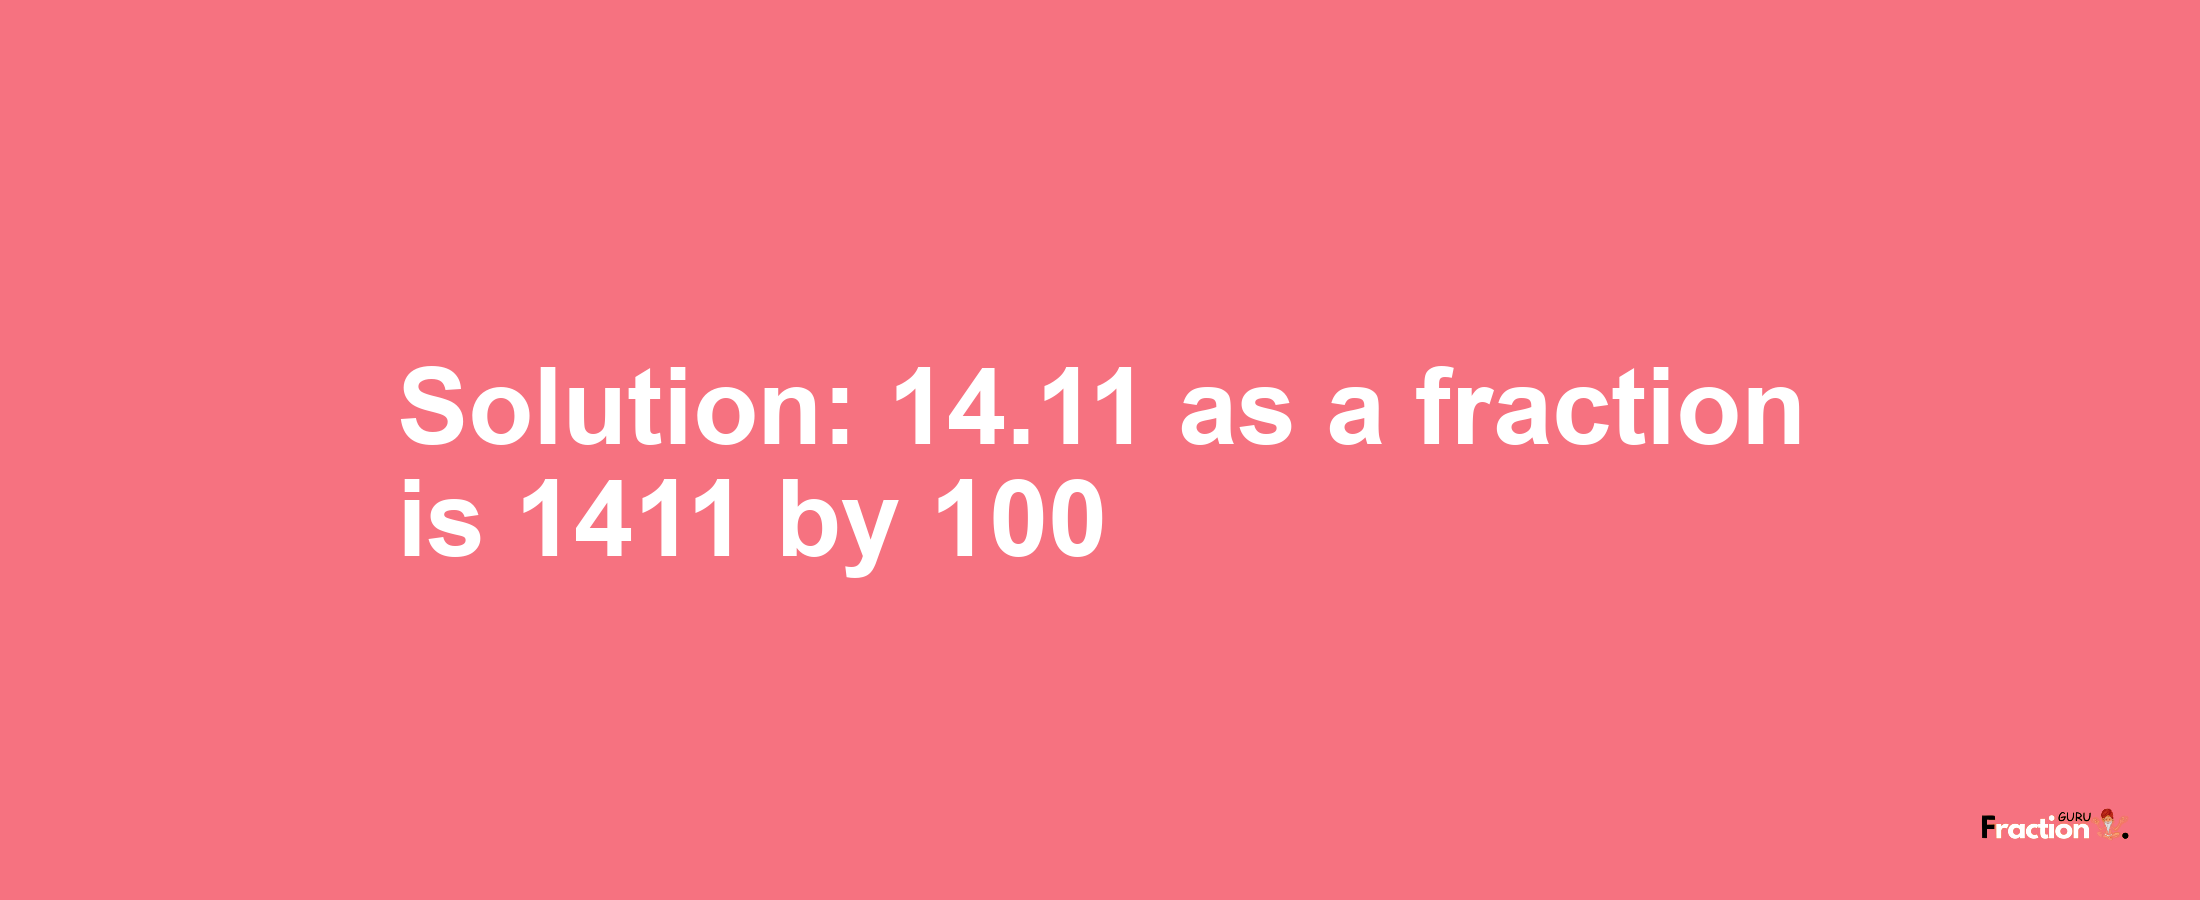 Solution:14.11 as a fraction is 1411/100